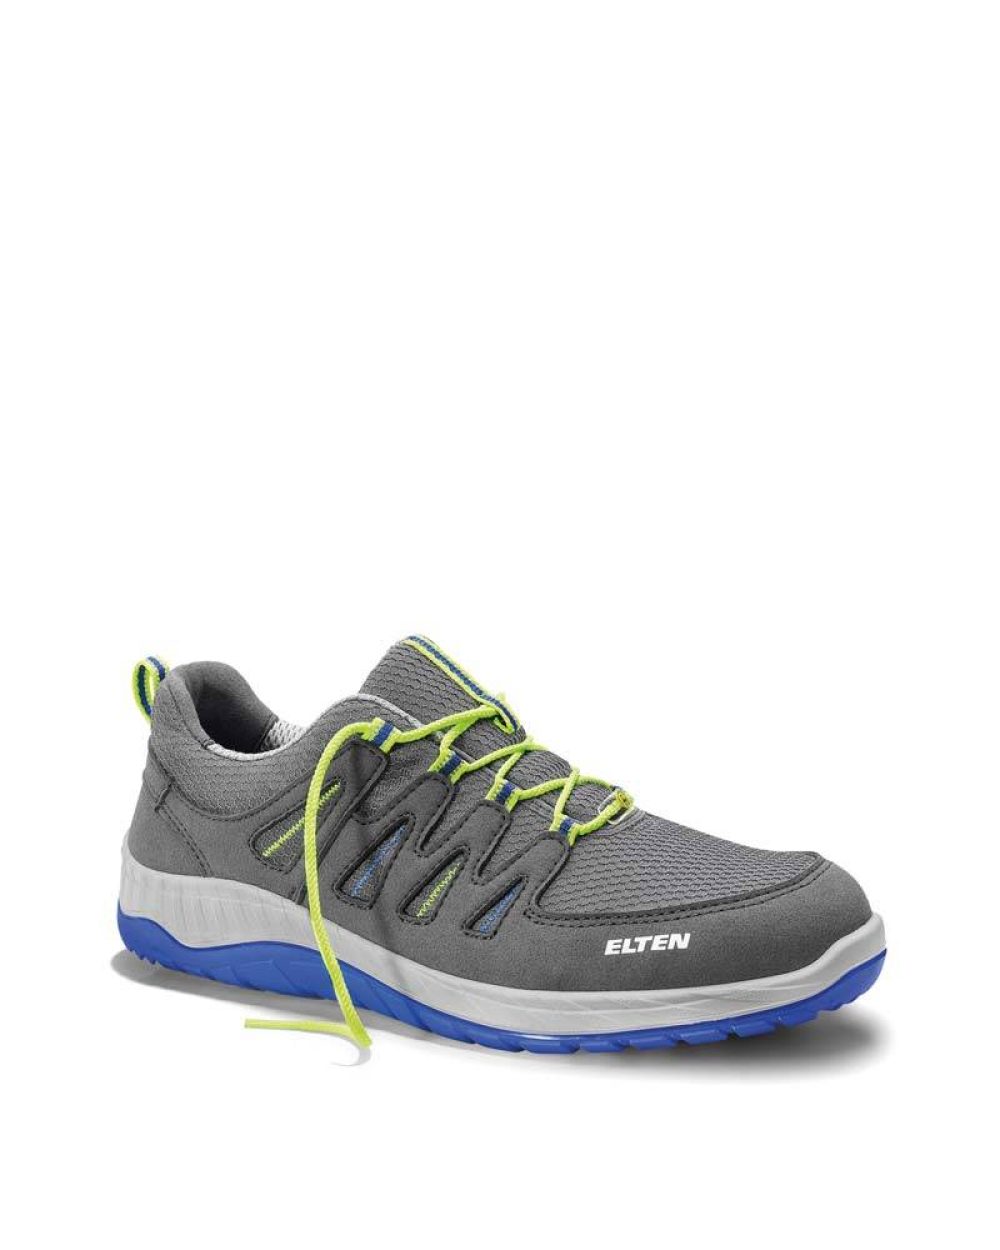 elten-arbeitsschuhe-pro_e_729551-maddox-grey-blue-low-esd-s1p